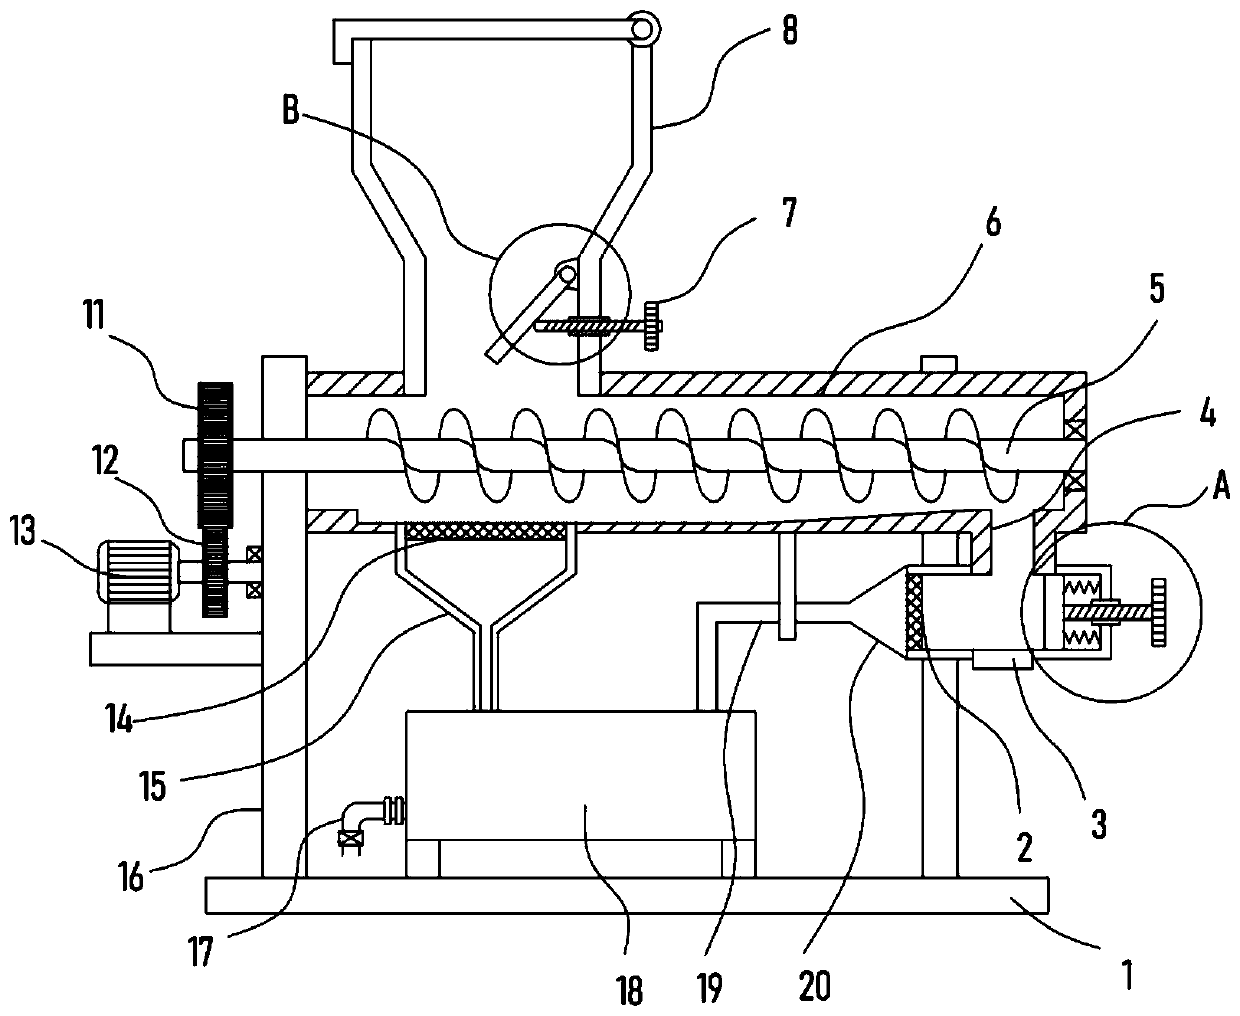 Peanut oil extracting device for processing peanut oil